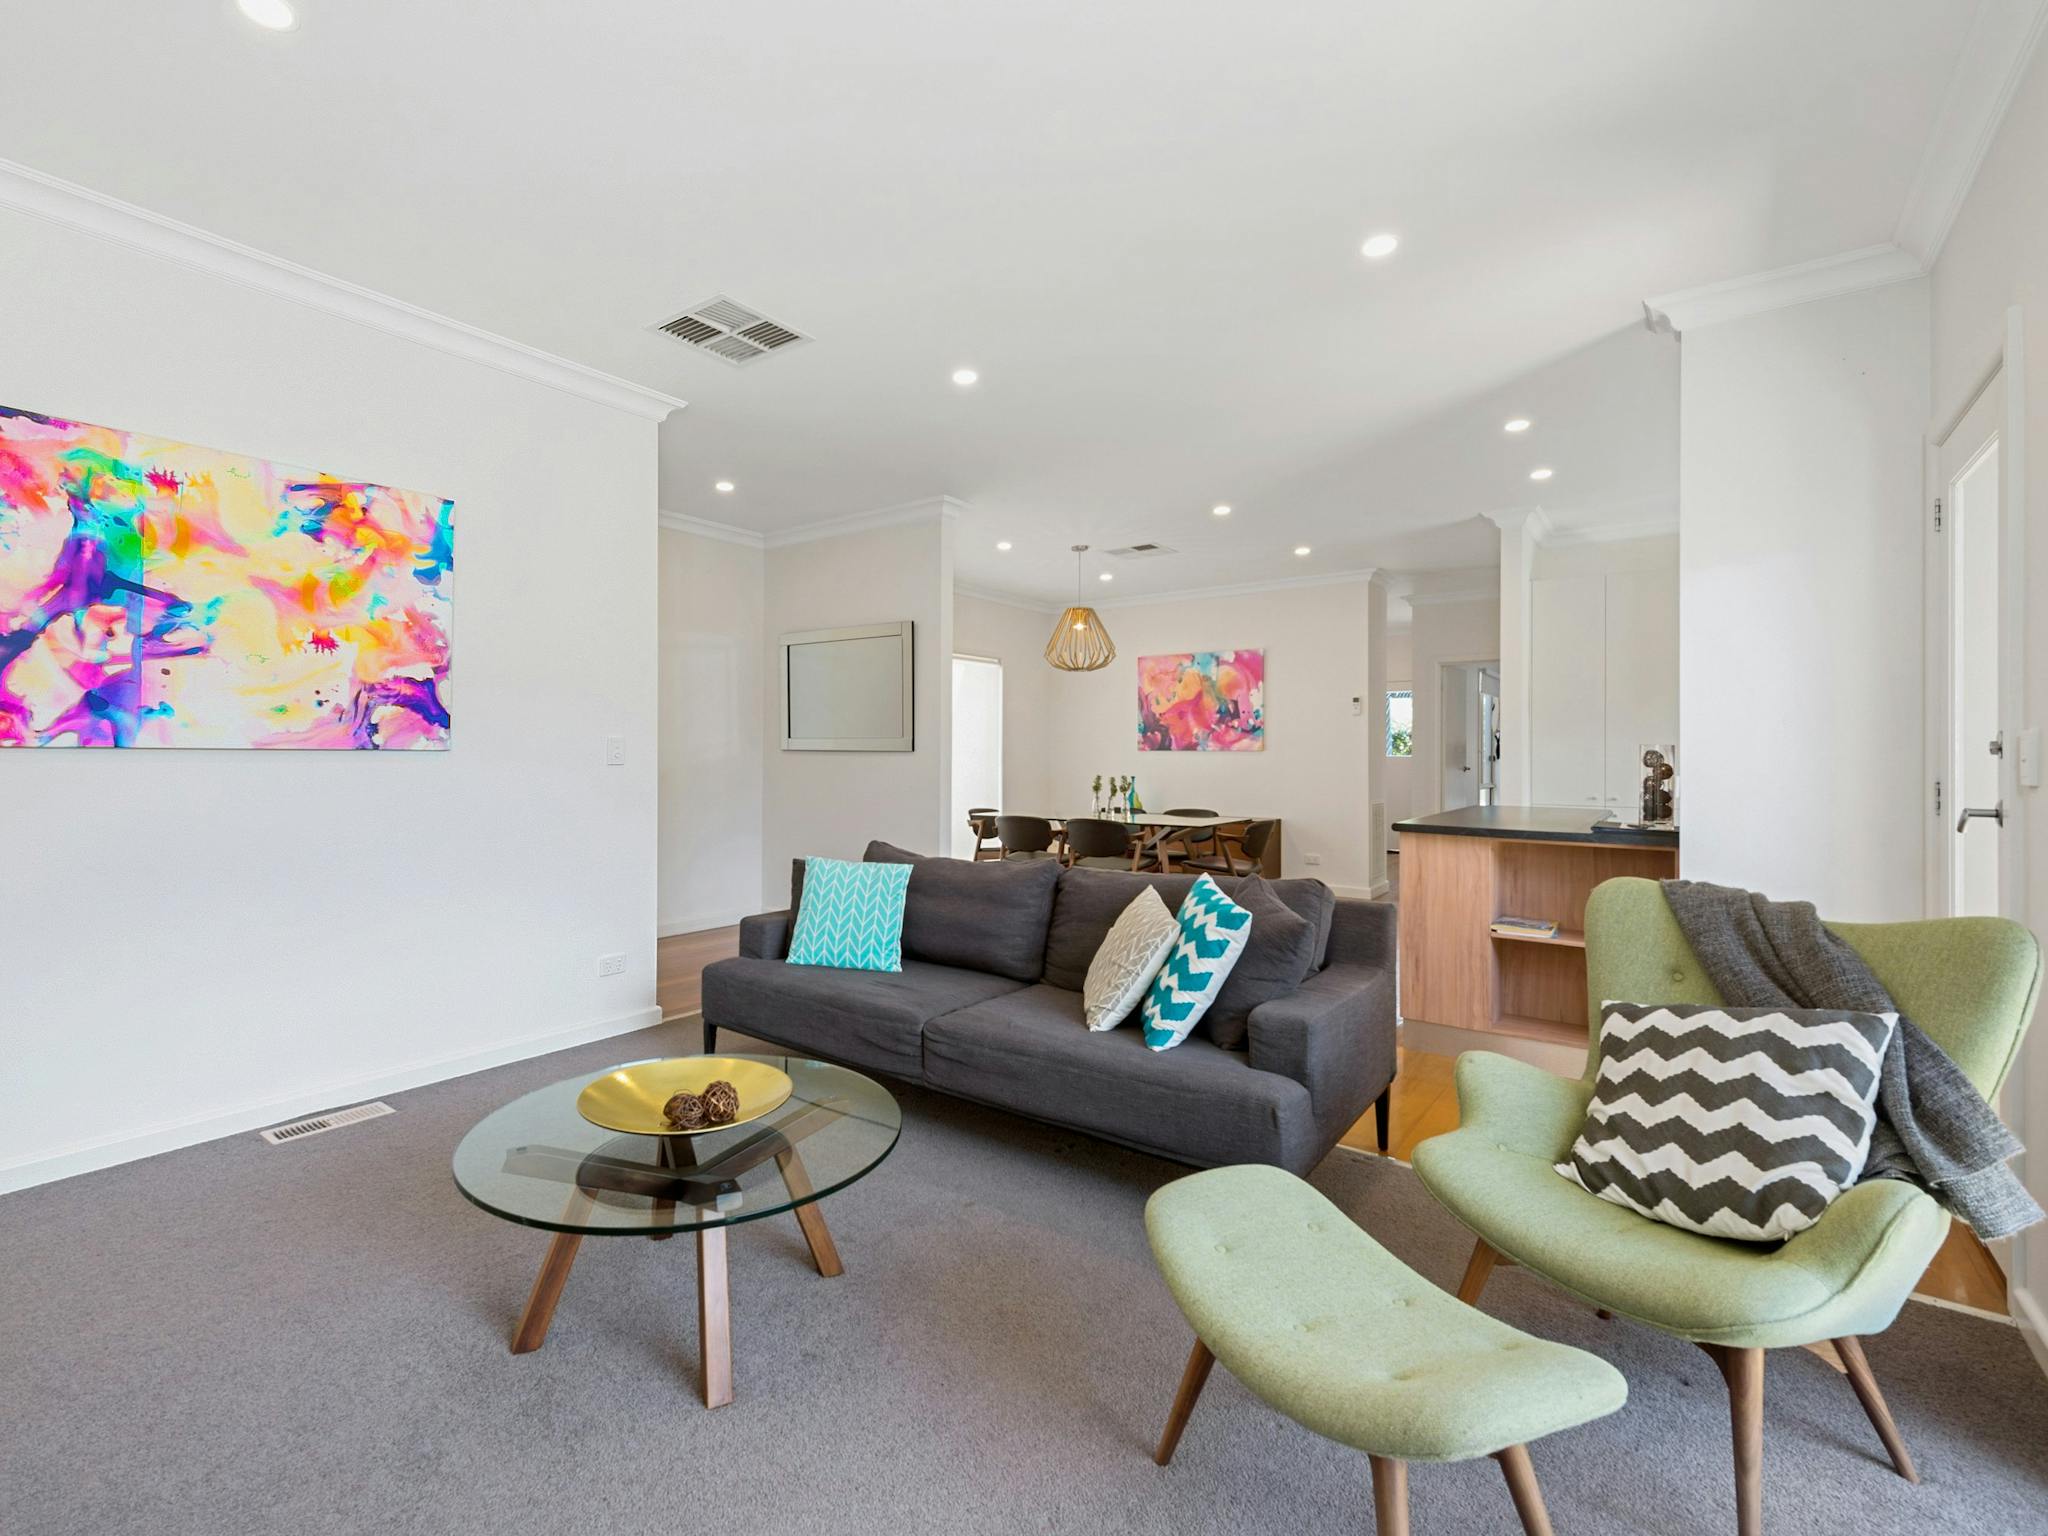 Located opposite The Gateway the townhouses are modern, fresh and perfect for a family or group